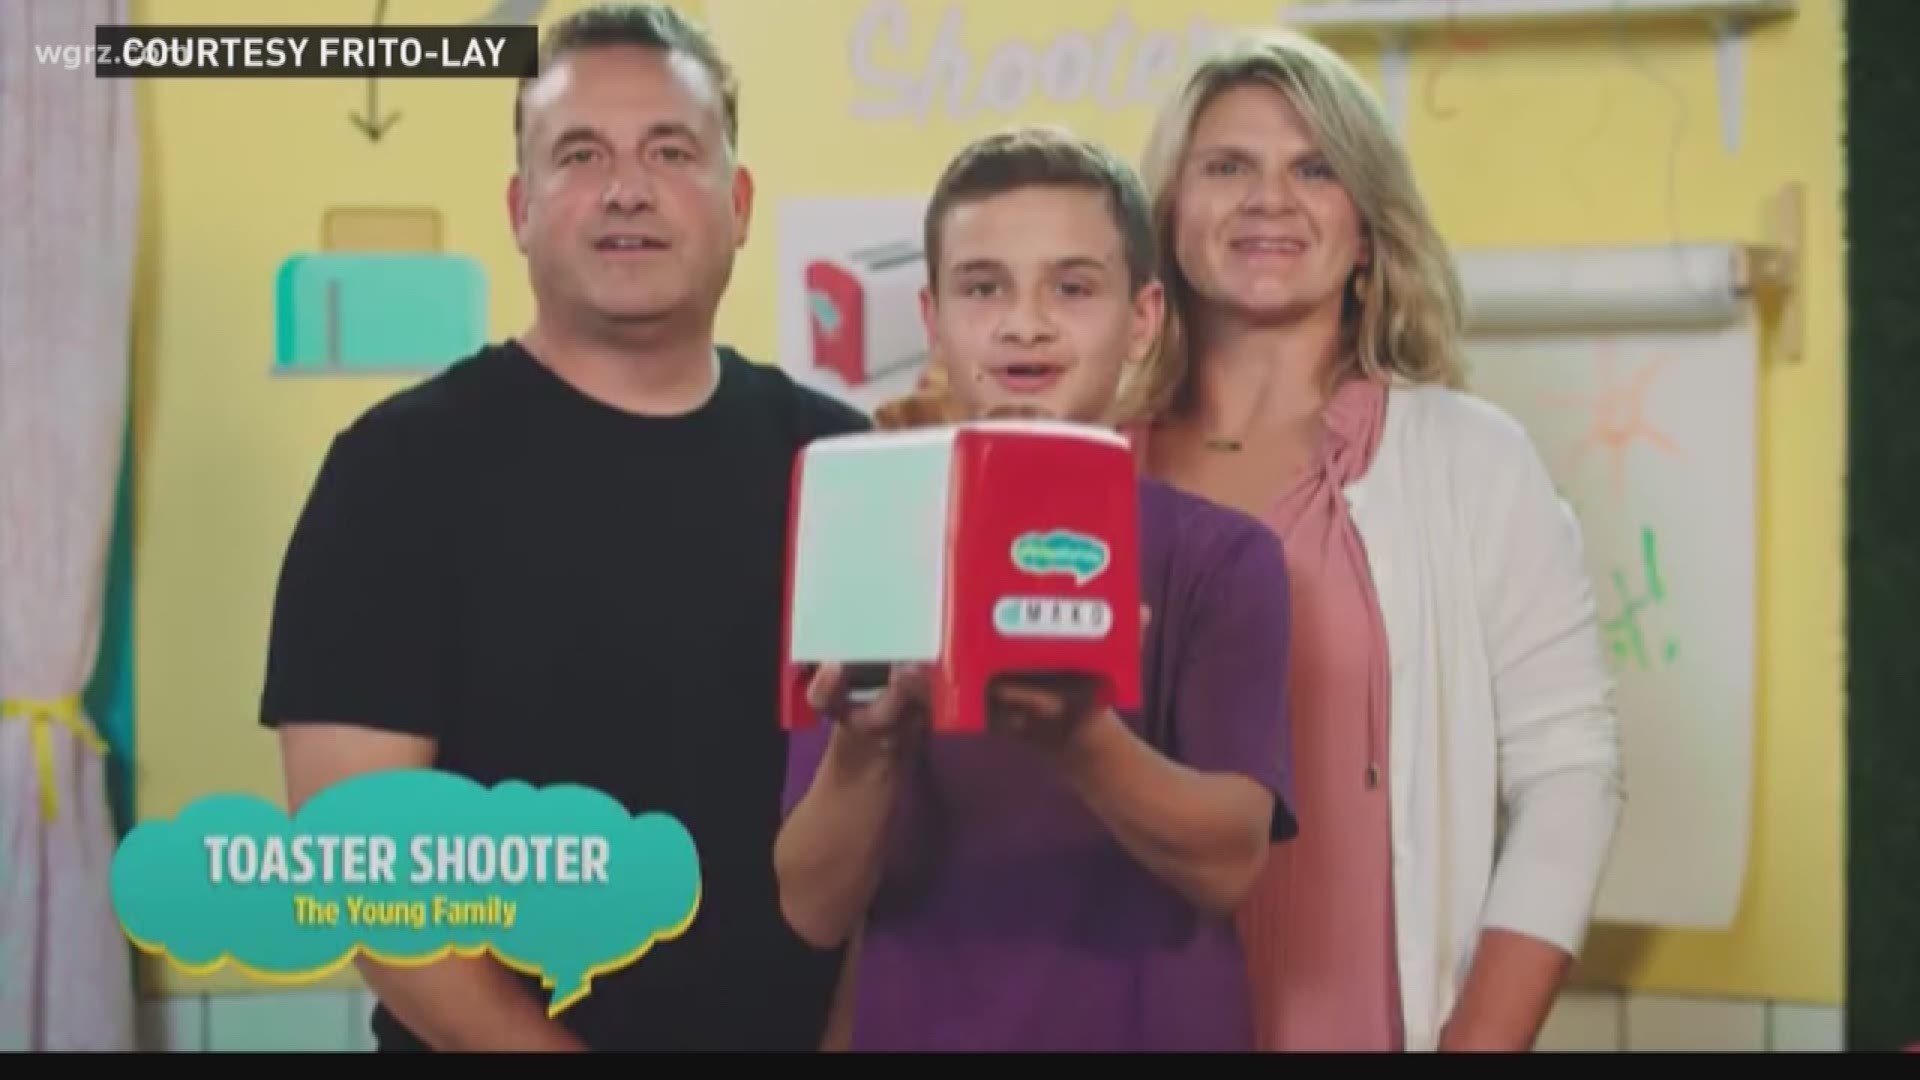 "Toaster Shooter" Gets Local Kid $250K Win